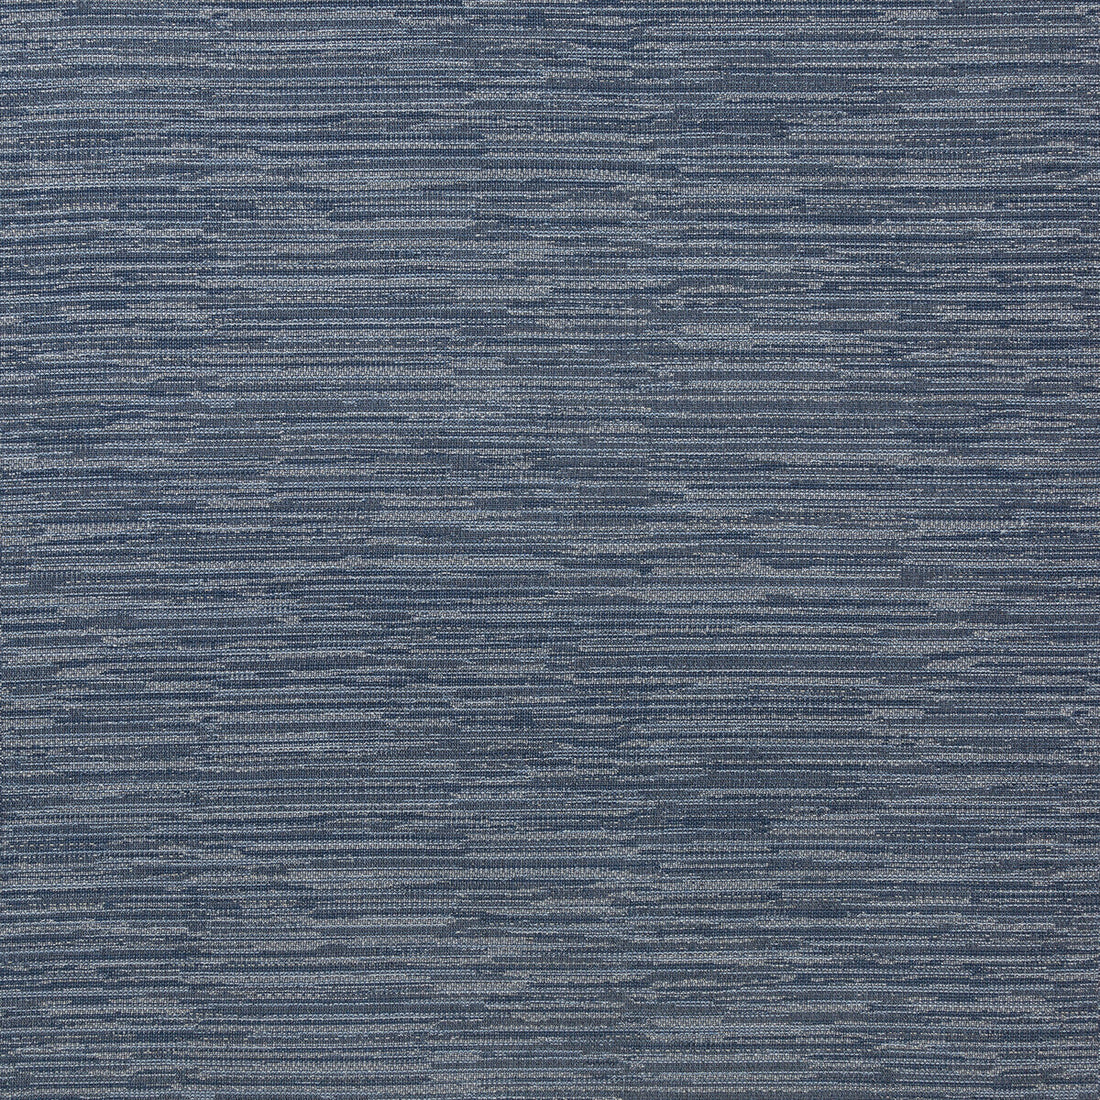 Stitch It Up fabric in indigo color - pattern 35494.50.0 - by Kravet Couture in the Vista collection